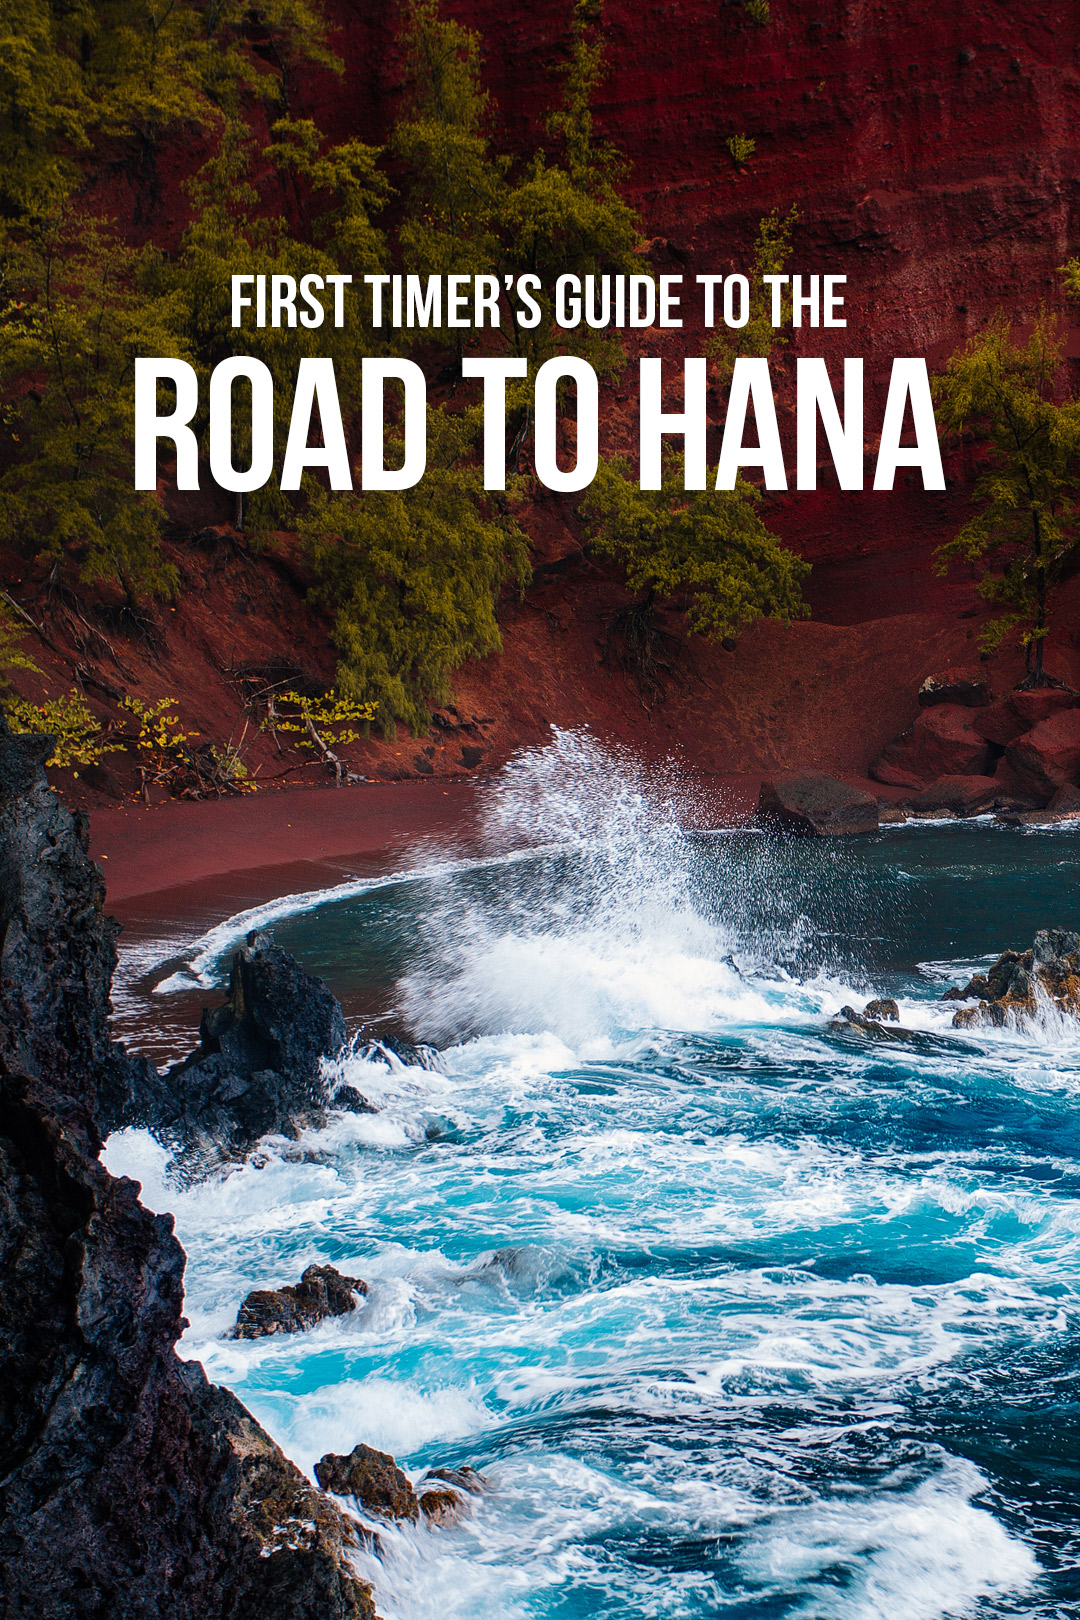 The Most Popular + Best Secret Stops on the Road to Hana in Maui Hawaii // Local Adventurer #roadtohana #hana #hanahwy #maui #hawaii #usa #roadtrip #travel #beach